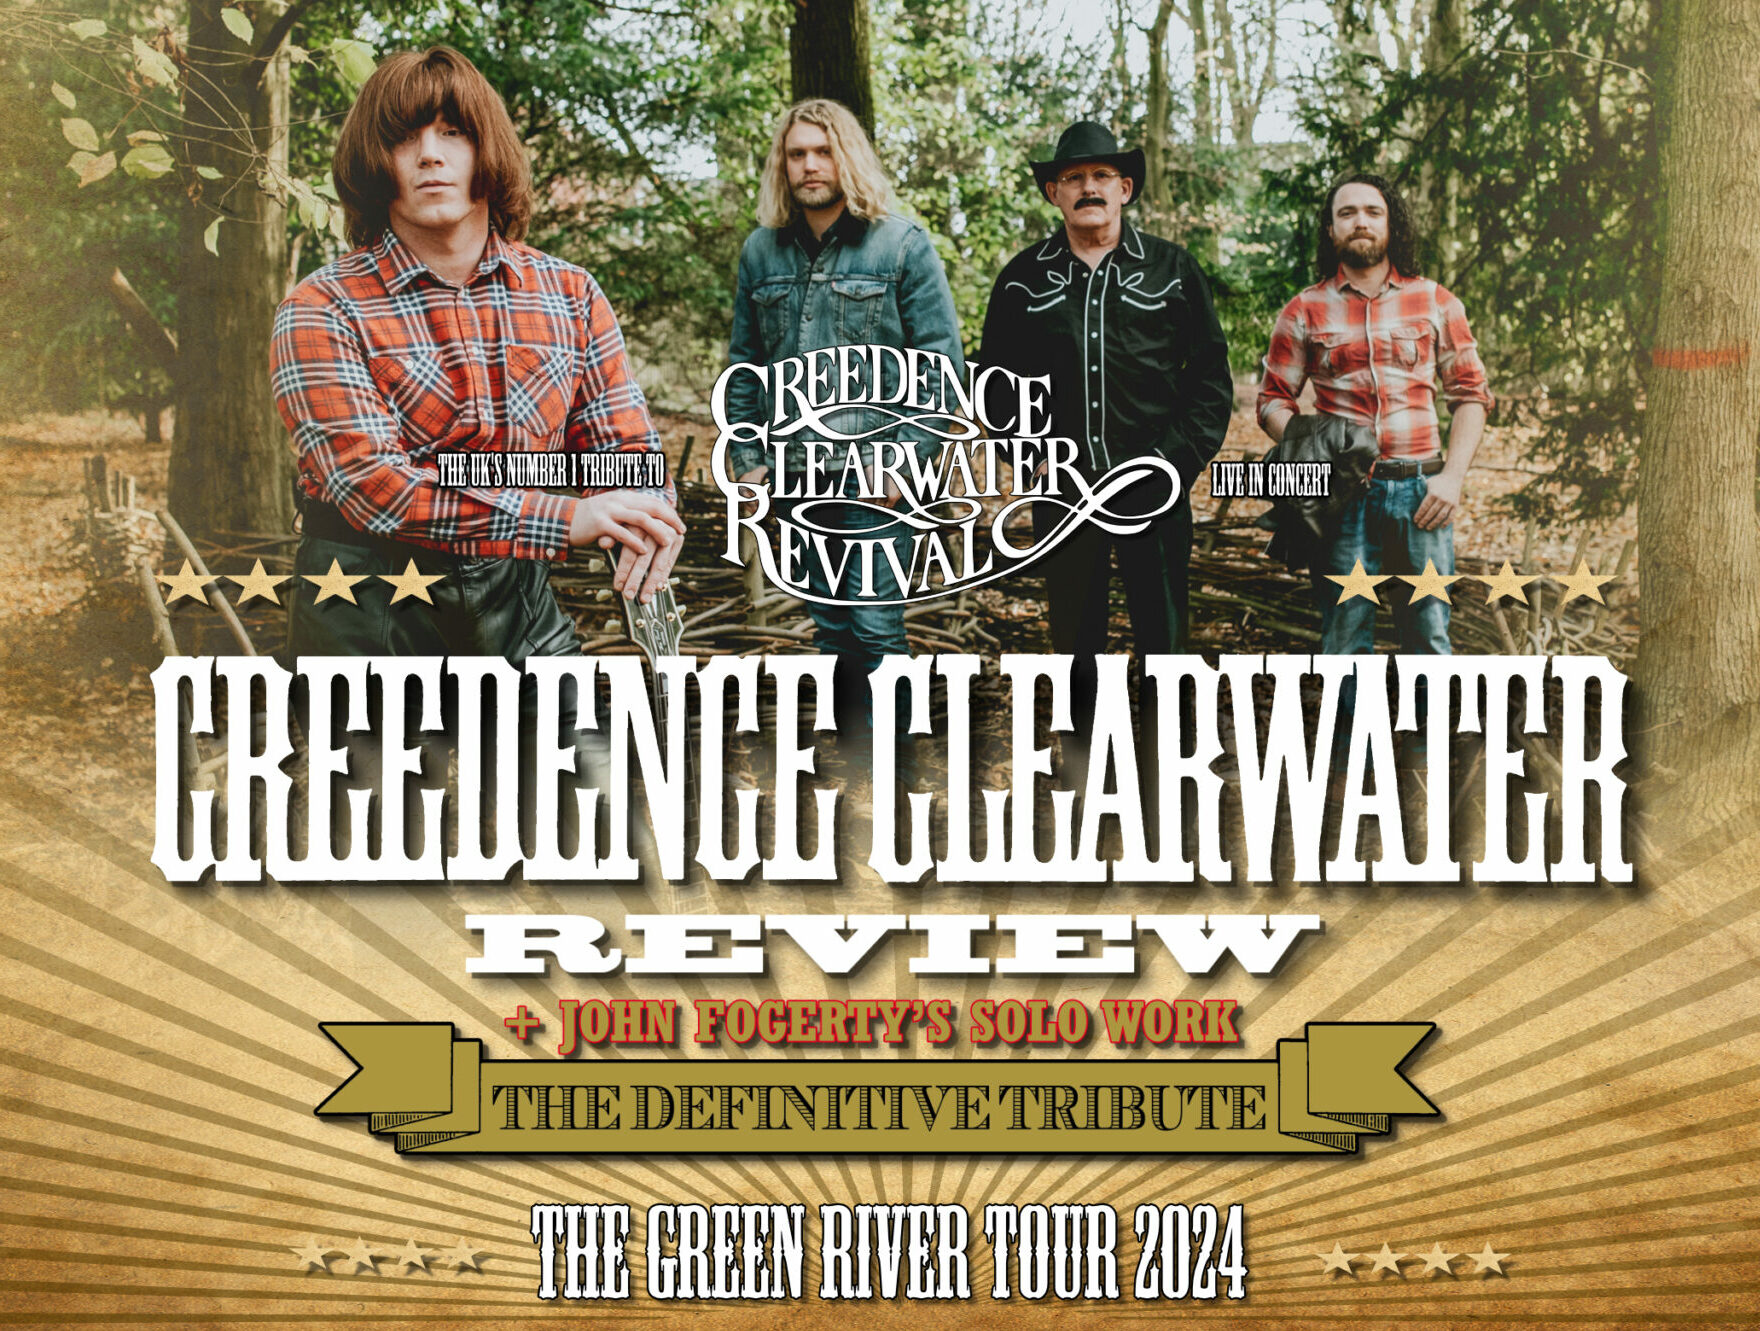 Creedence Clearwater Revival Tribute Show: The Green River Tour